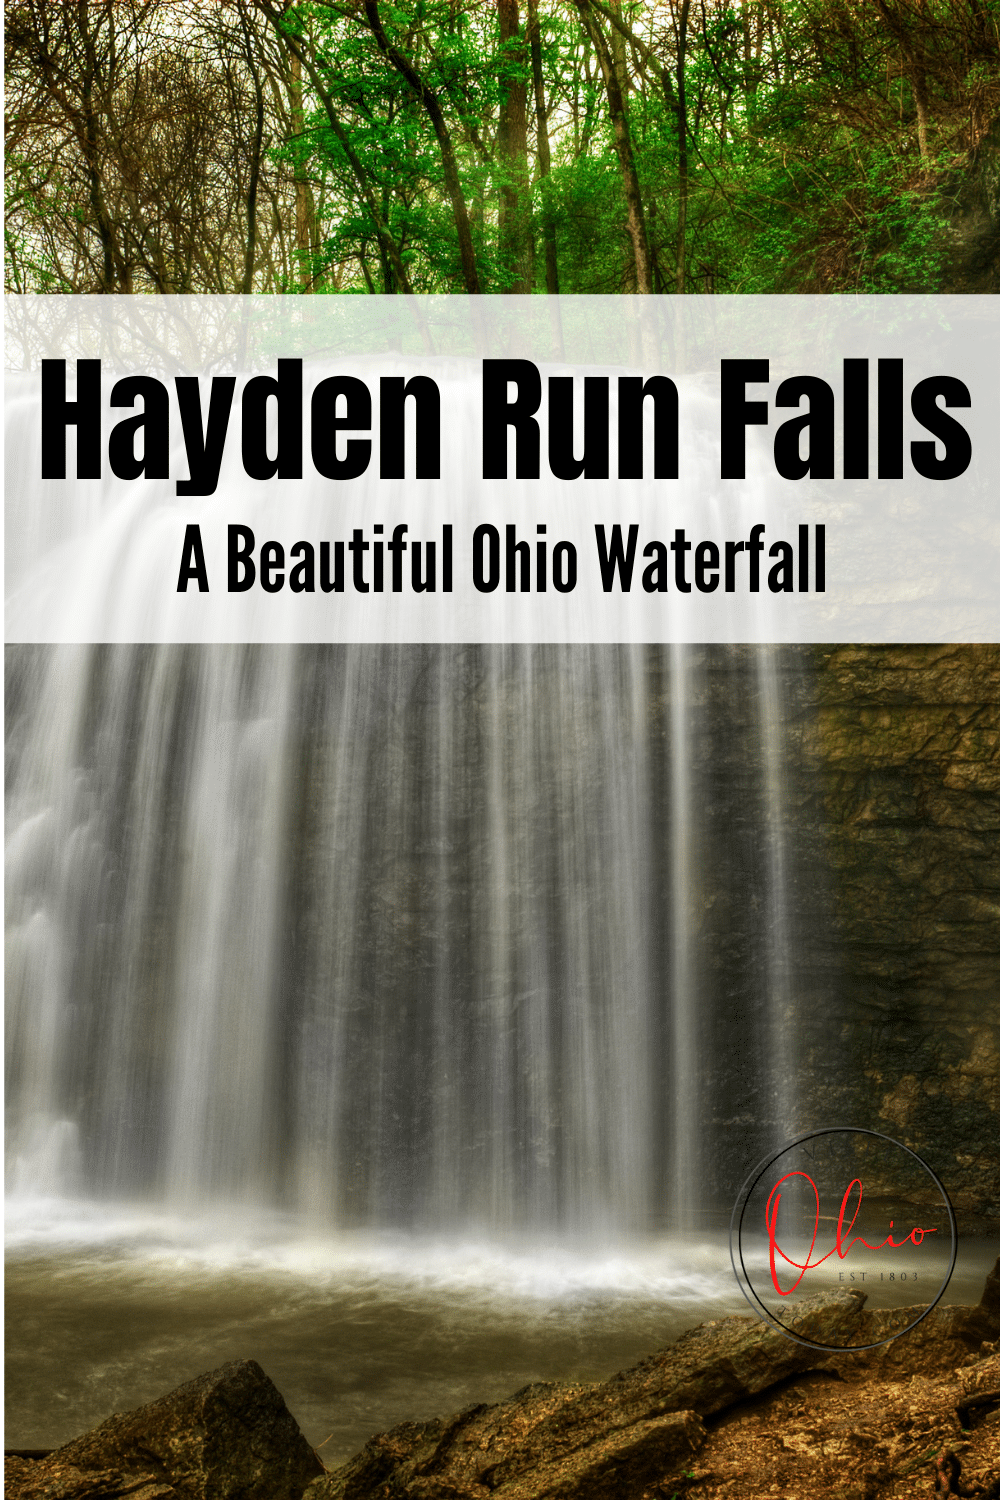 Hayden Falls is a beautiful hidden gem of a Waterfall tucked into the busy bustling suburb of Dublin, Ohio. Take the afternoon to check out this Ohio Waterfall called Hayden Run Falls. #HaydenRunFalls #ohiowaterfalls